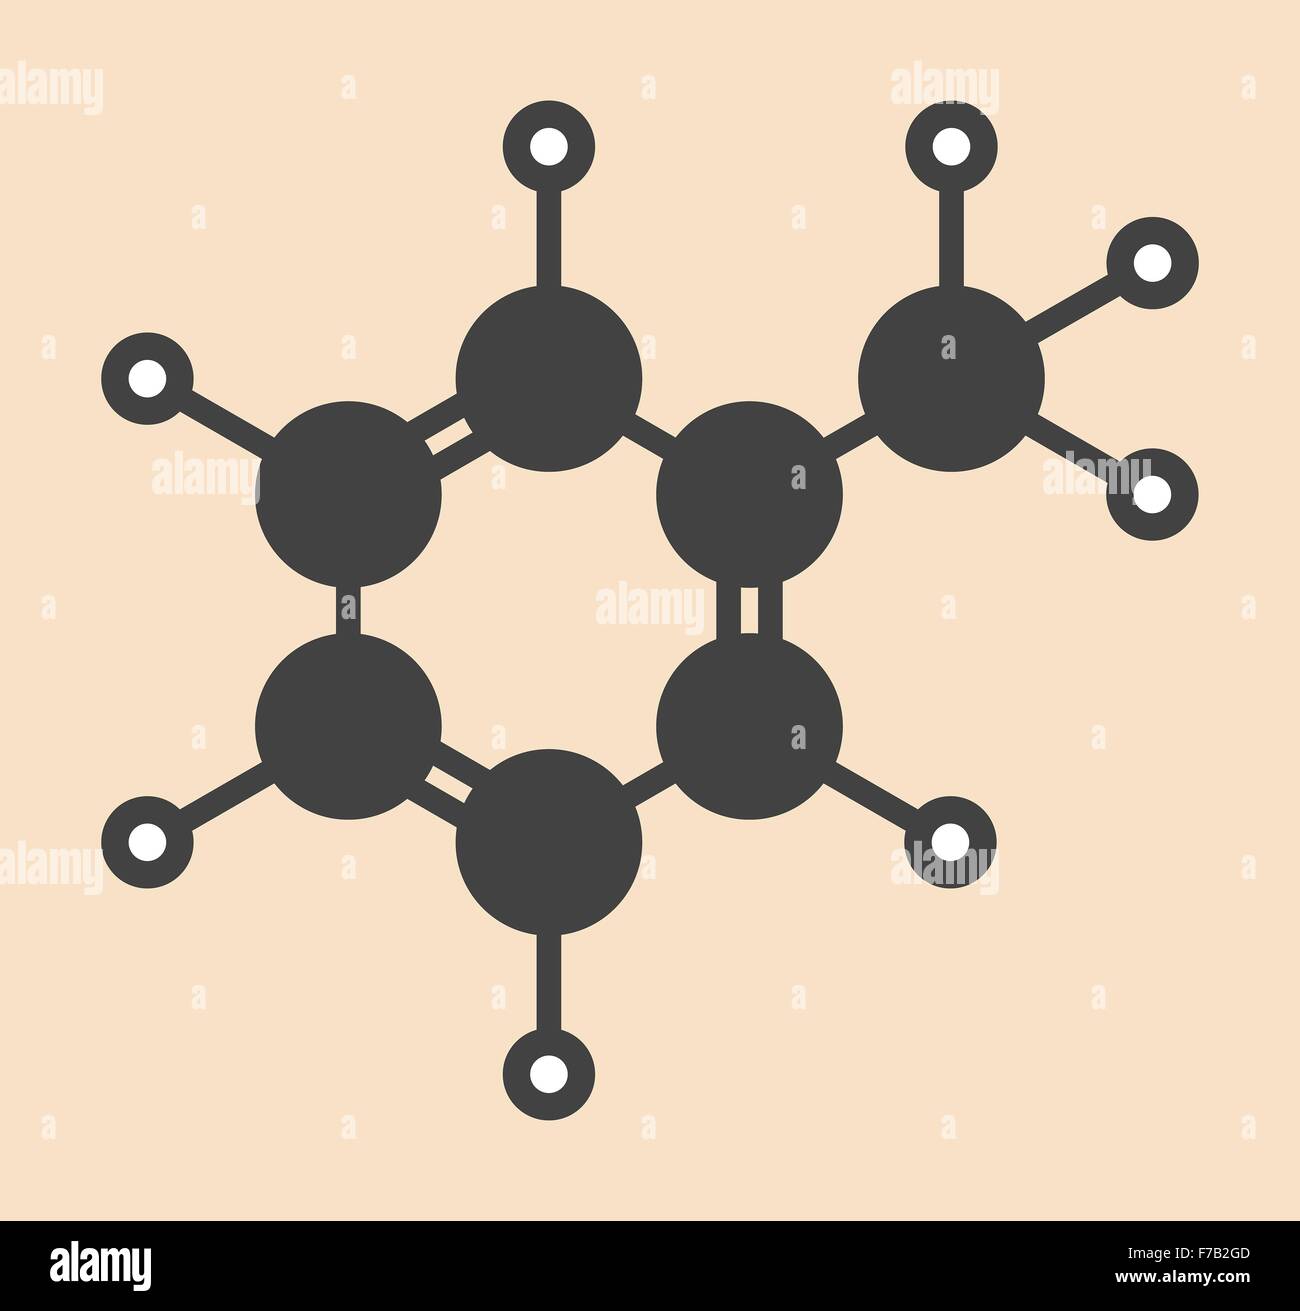 Toluene (methylbenzen, toluol) chemical solvent molecule. Stylized skeletal formula (chemical structure). Atoms are shown as Stock Photo